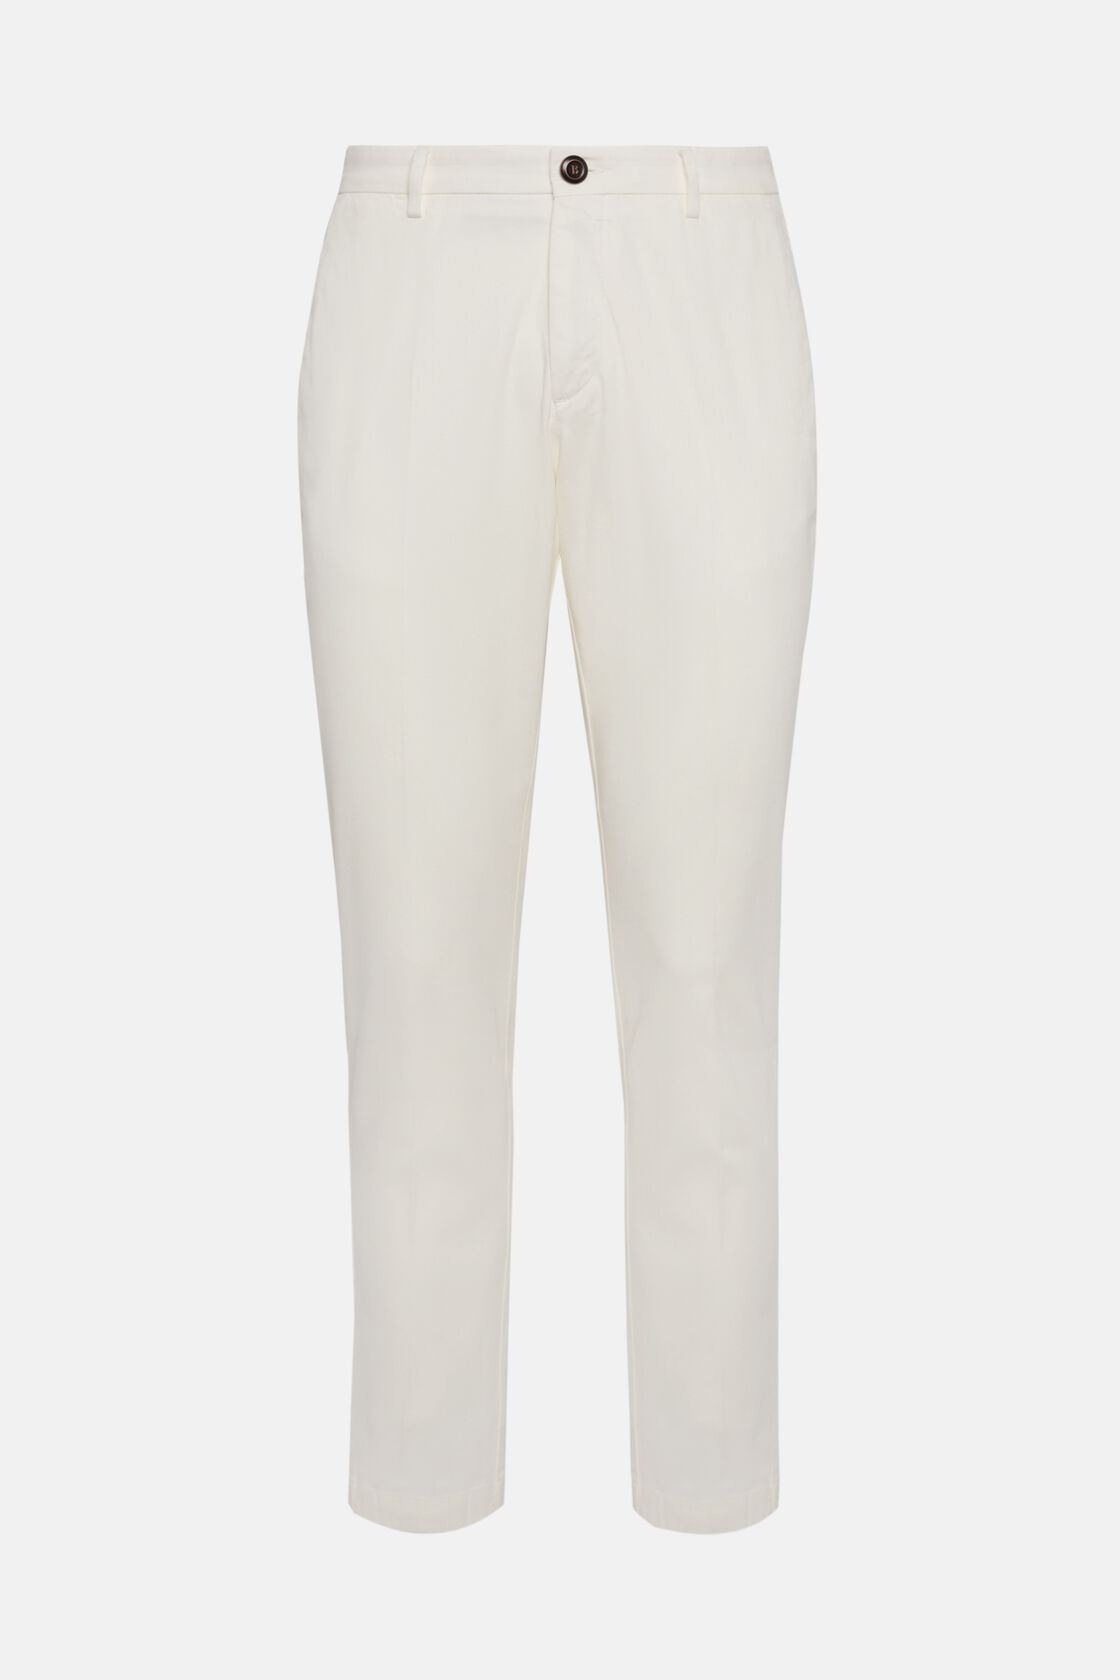 Stretch Cotton Trousers, White, hi-res